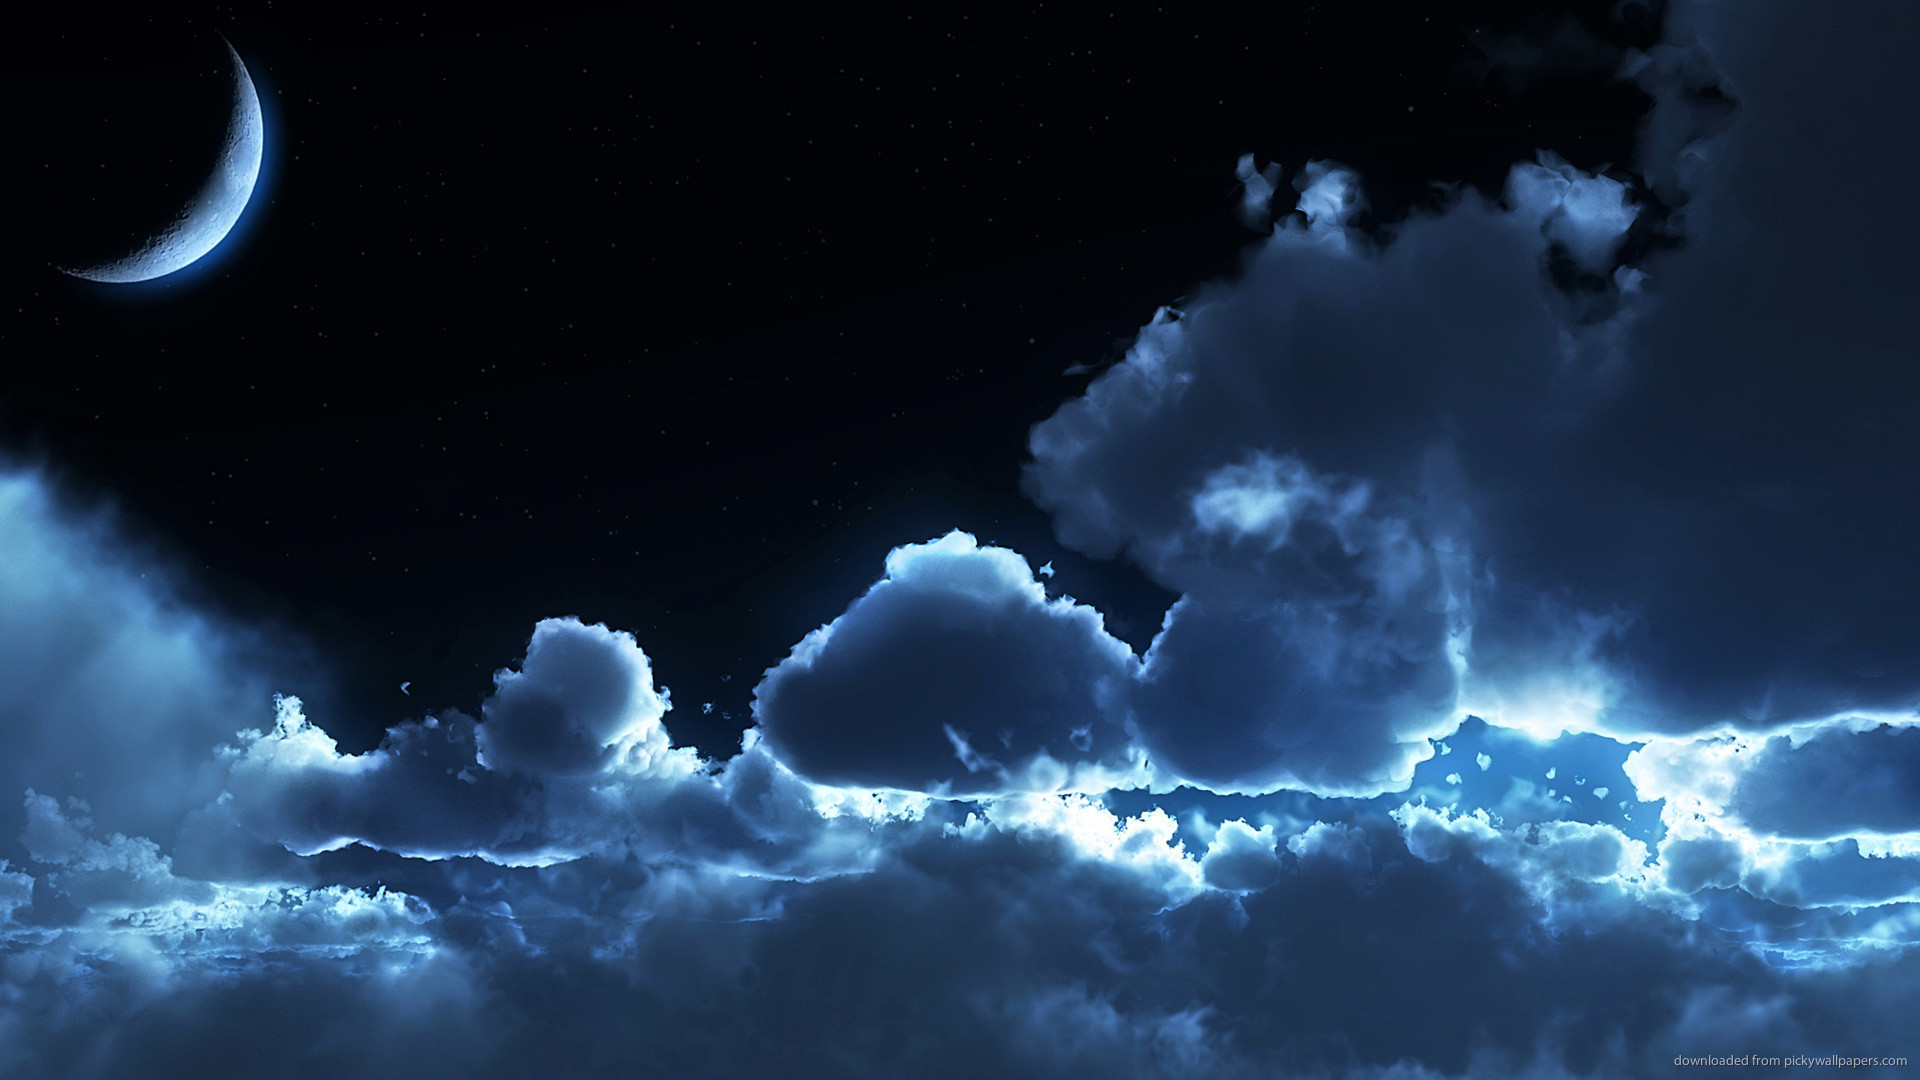 1920x1080 1280x1024 Night Blue Clouds and Moon wallpaper